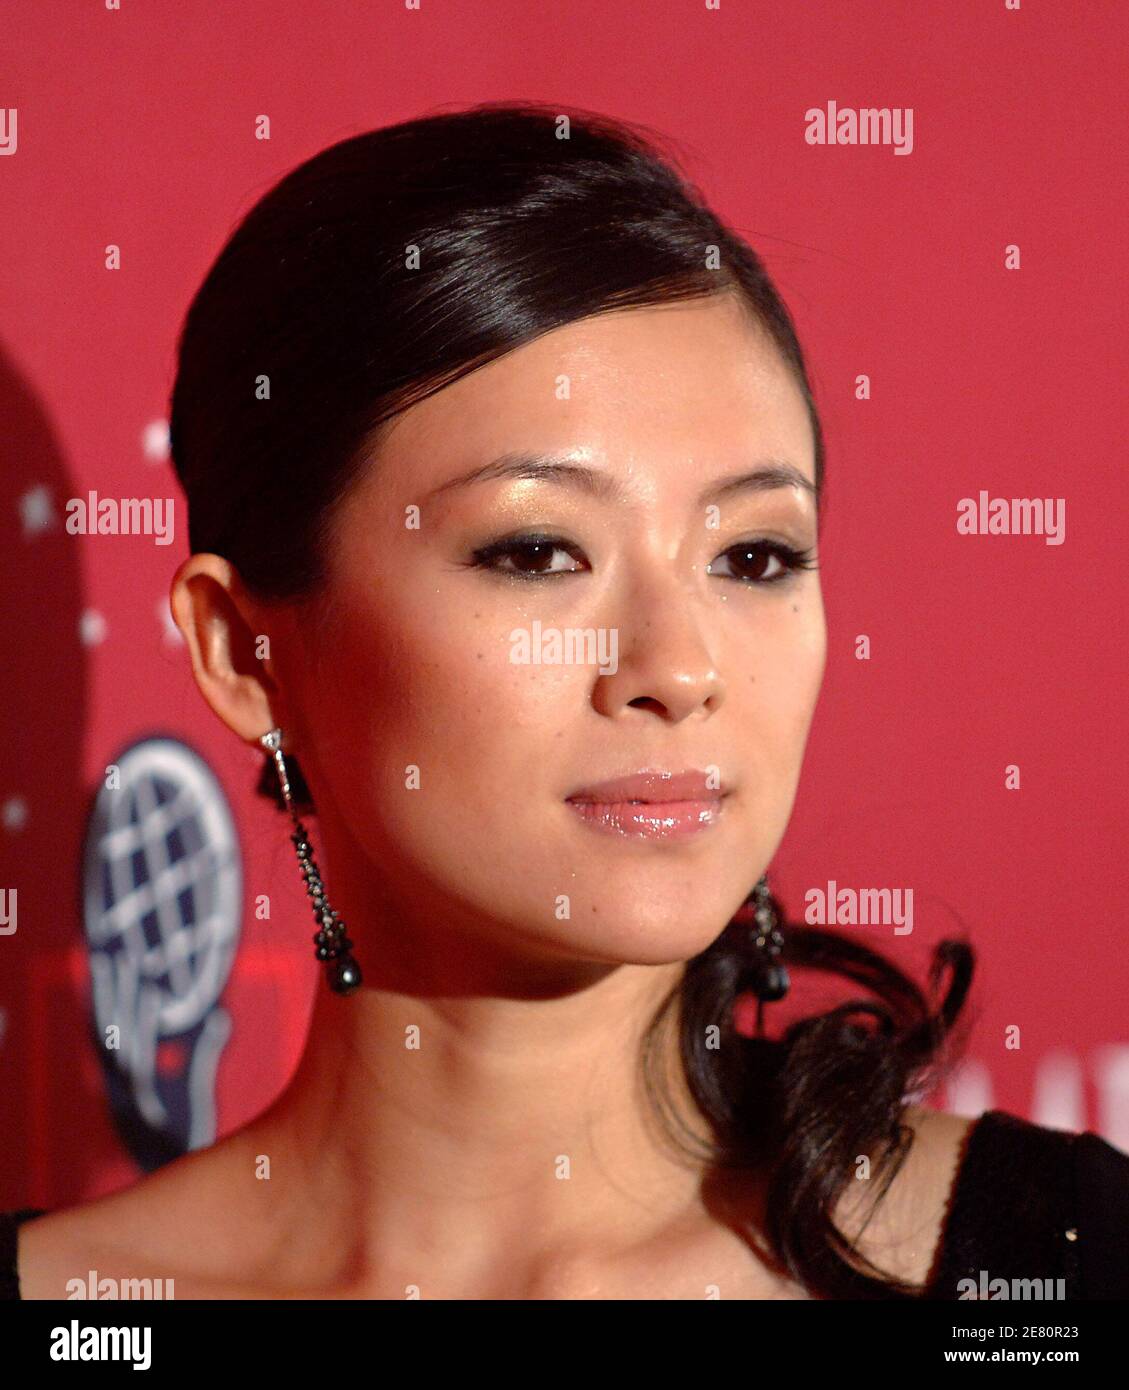 Ziyi Zhang arrives for the Time's 100 Gala at Jazz at Lincoln Center in New York City, NY USA on May 8, 2007, to celebrate the magazine's list of the 100 most influential people in the World. Photo by Olivier Douliery/ABACAPRESS.COM Stock Photo